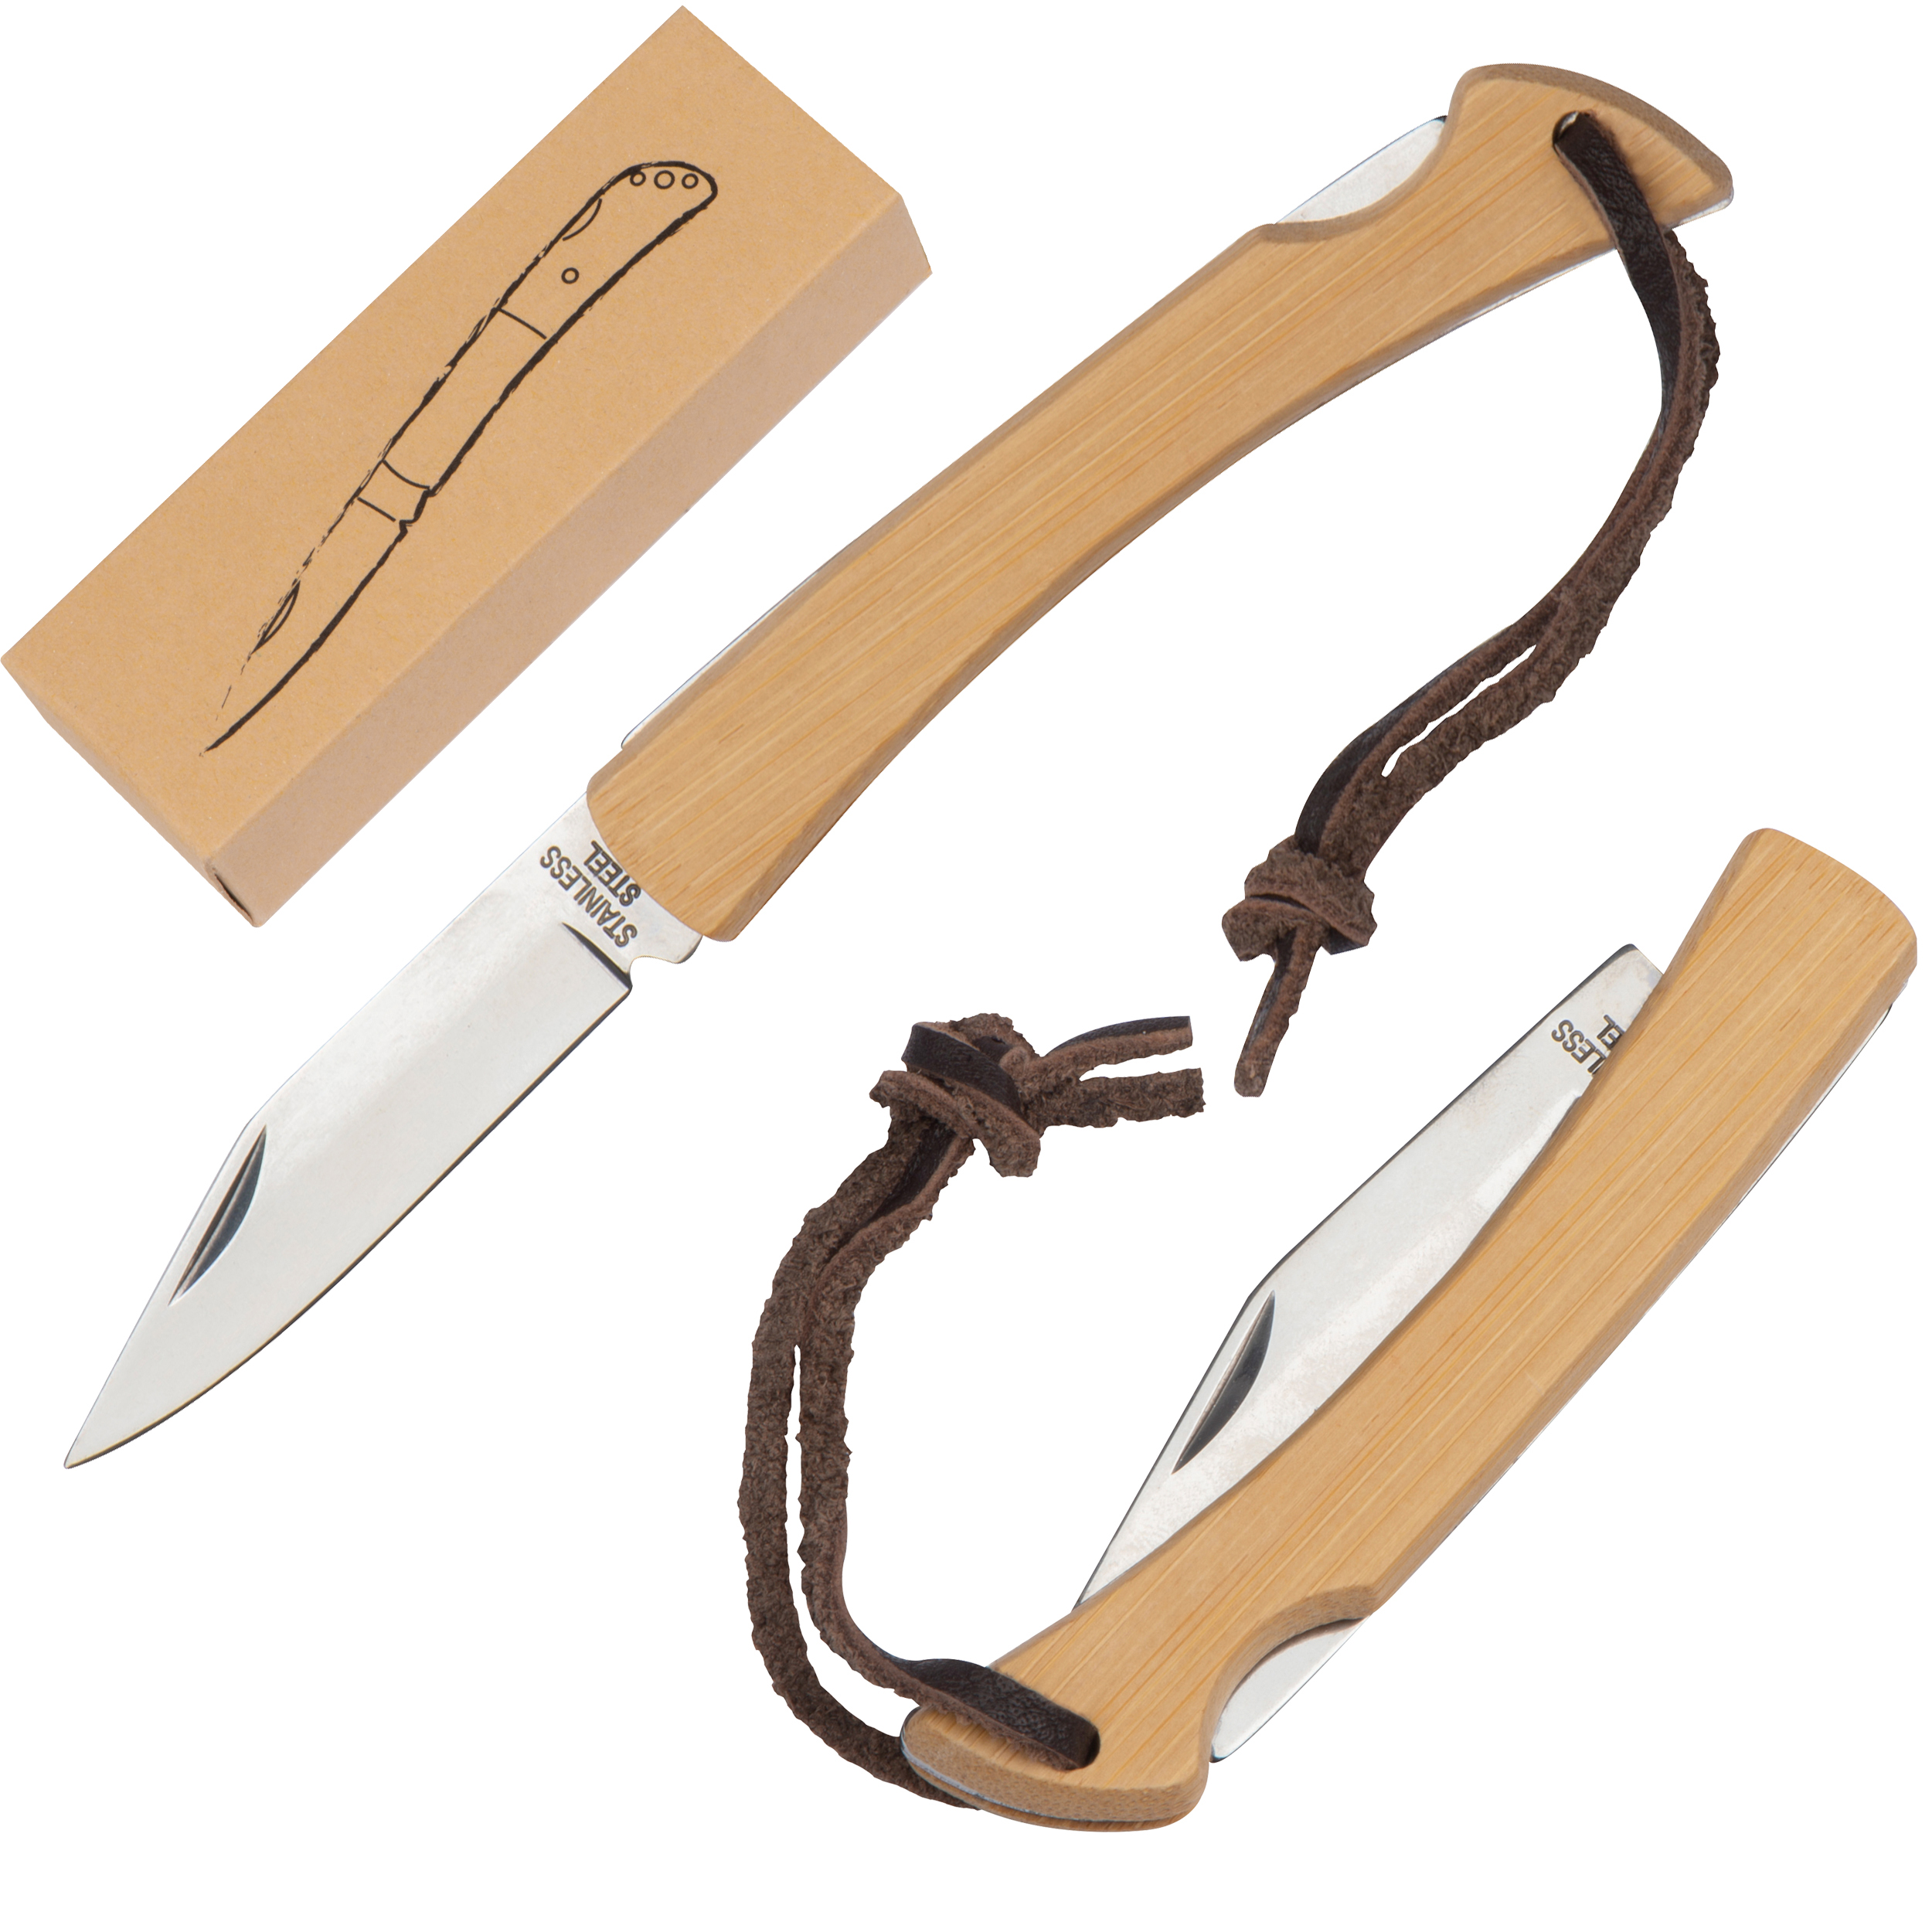 A pocket knife that features a blade made from bamboo steel - Upper Broughton